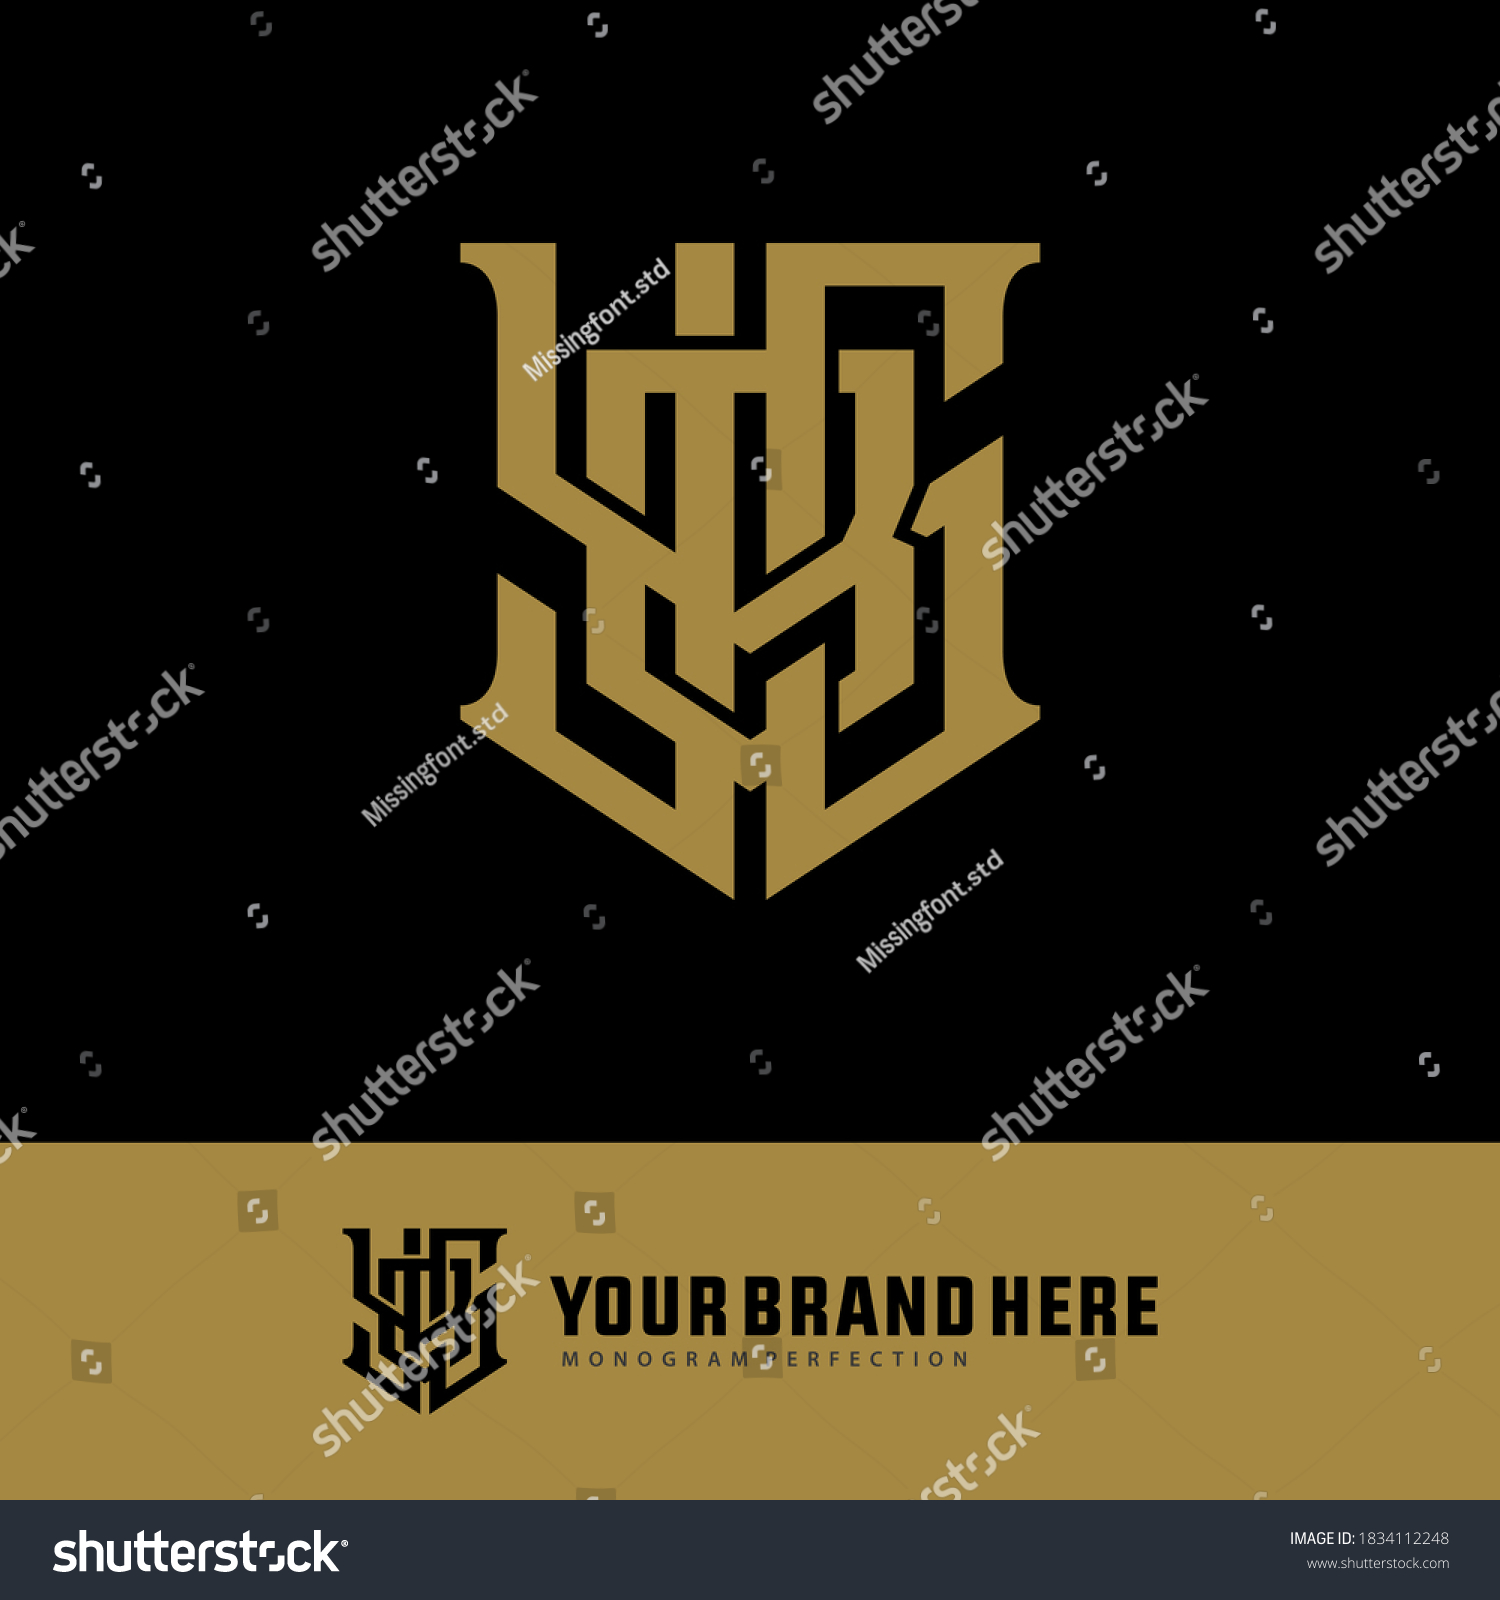 SVG of Initial letter Y, B, S, YBS, YSB, BSY, BYS, SYB or SBY overlapping, interlock, monogram logo, gold color on black background svg